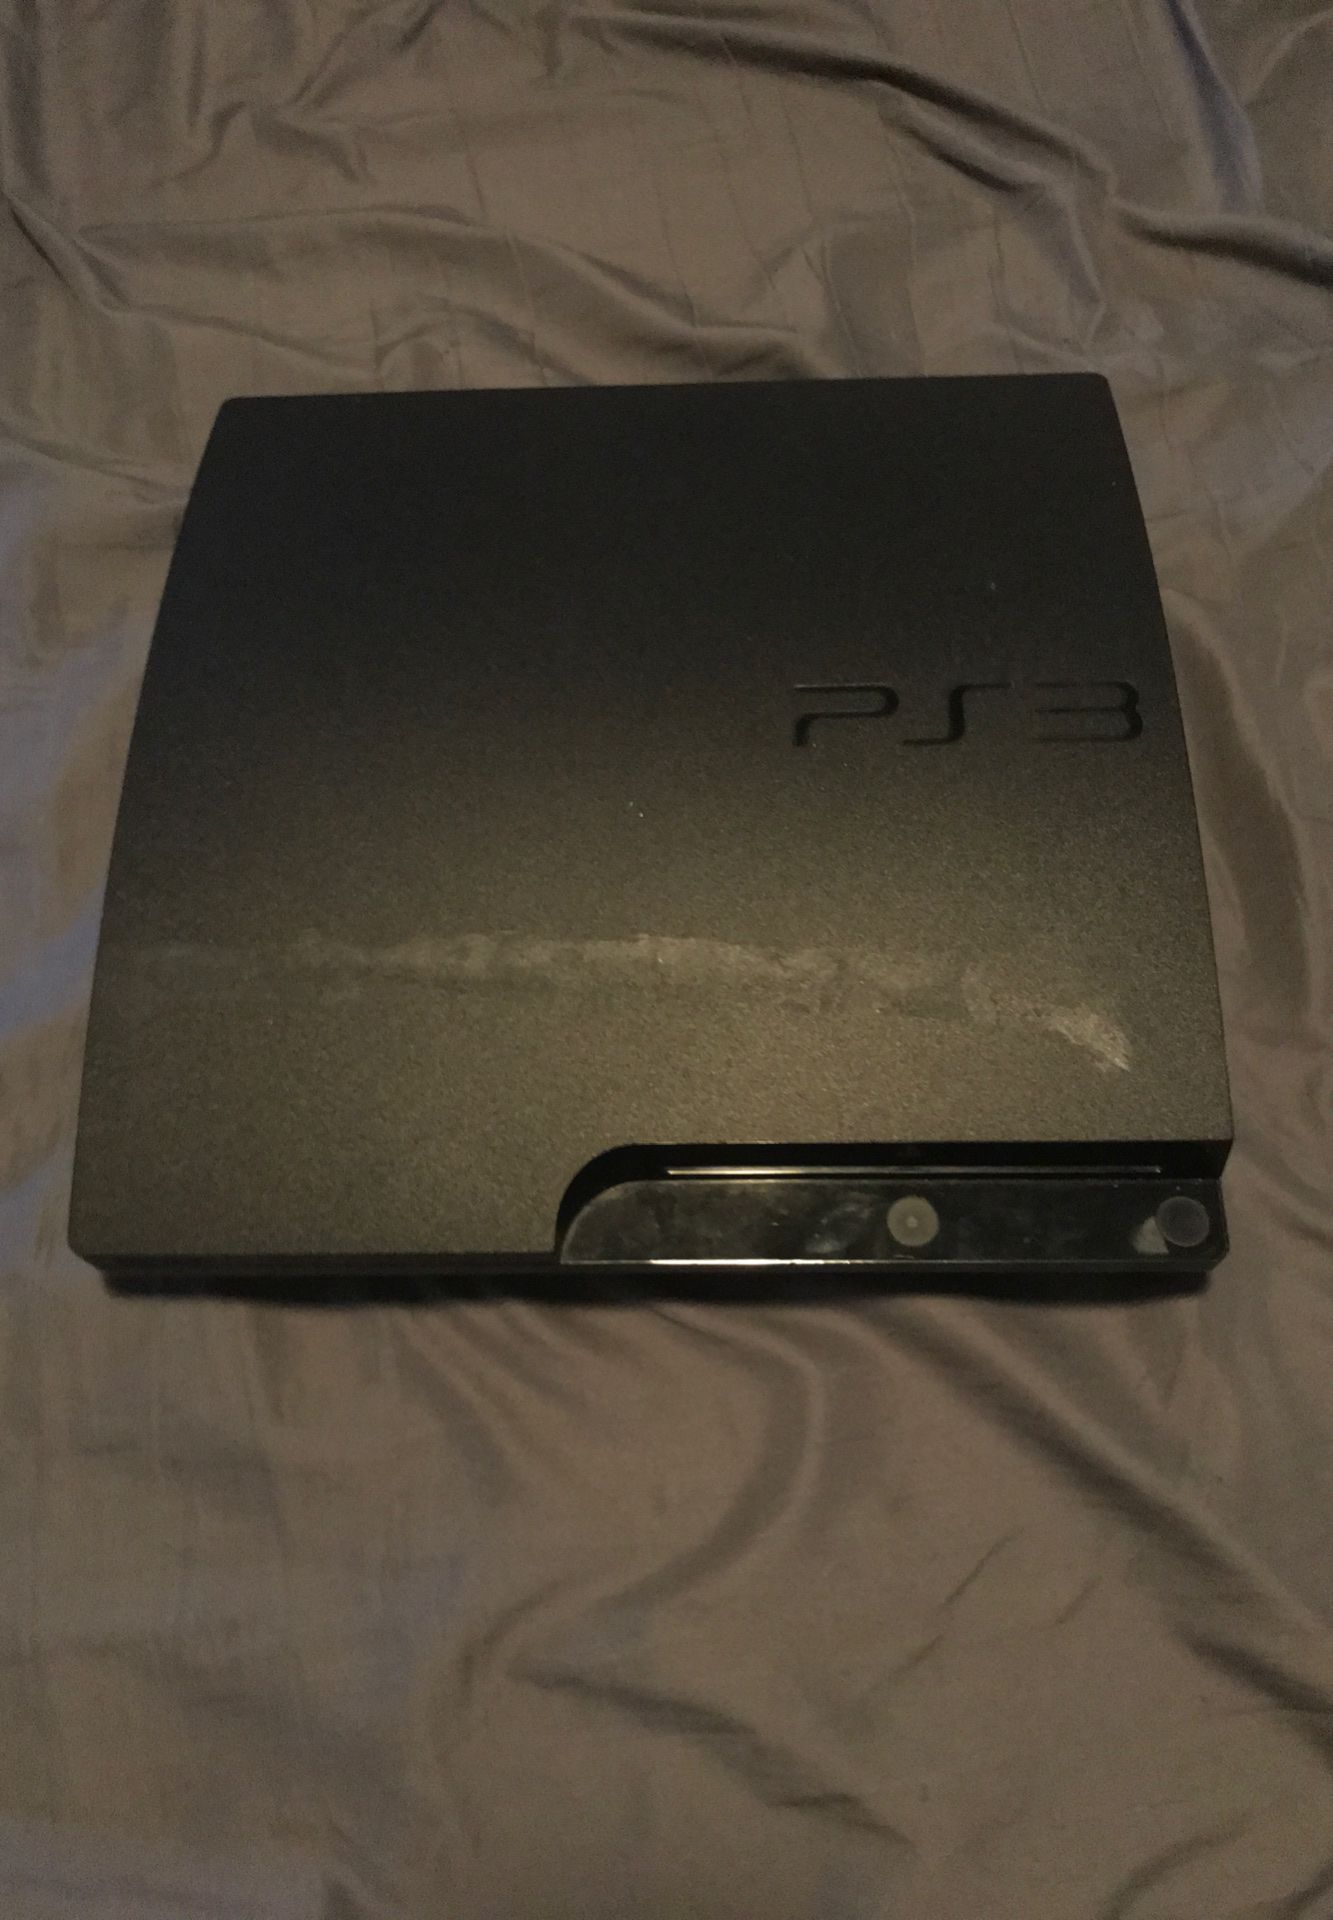 Ps3 doesn’t work freezes